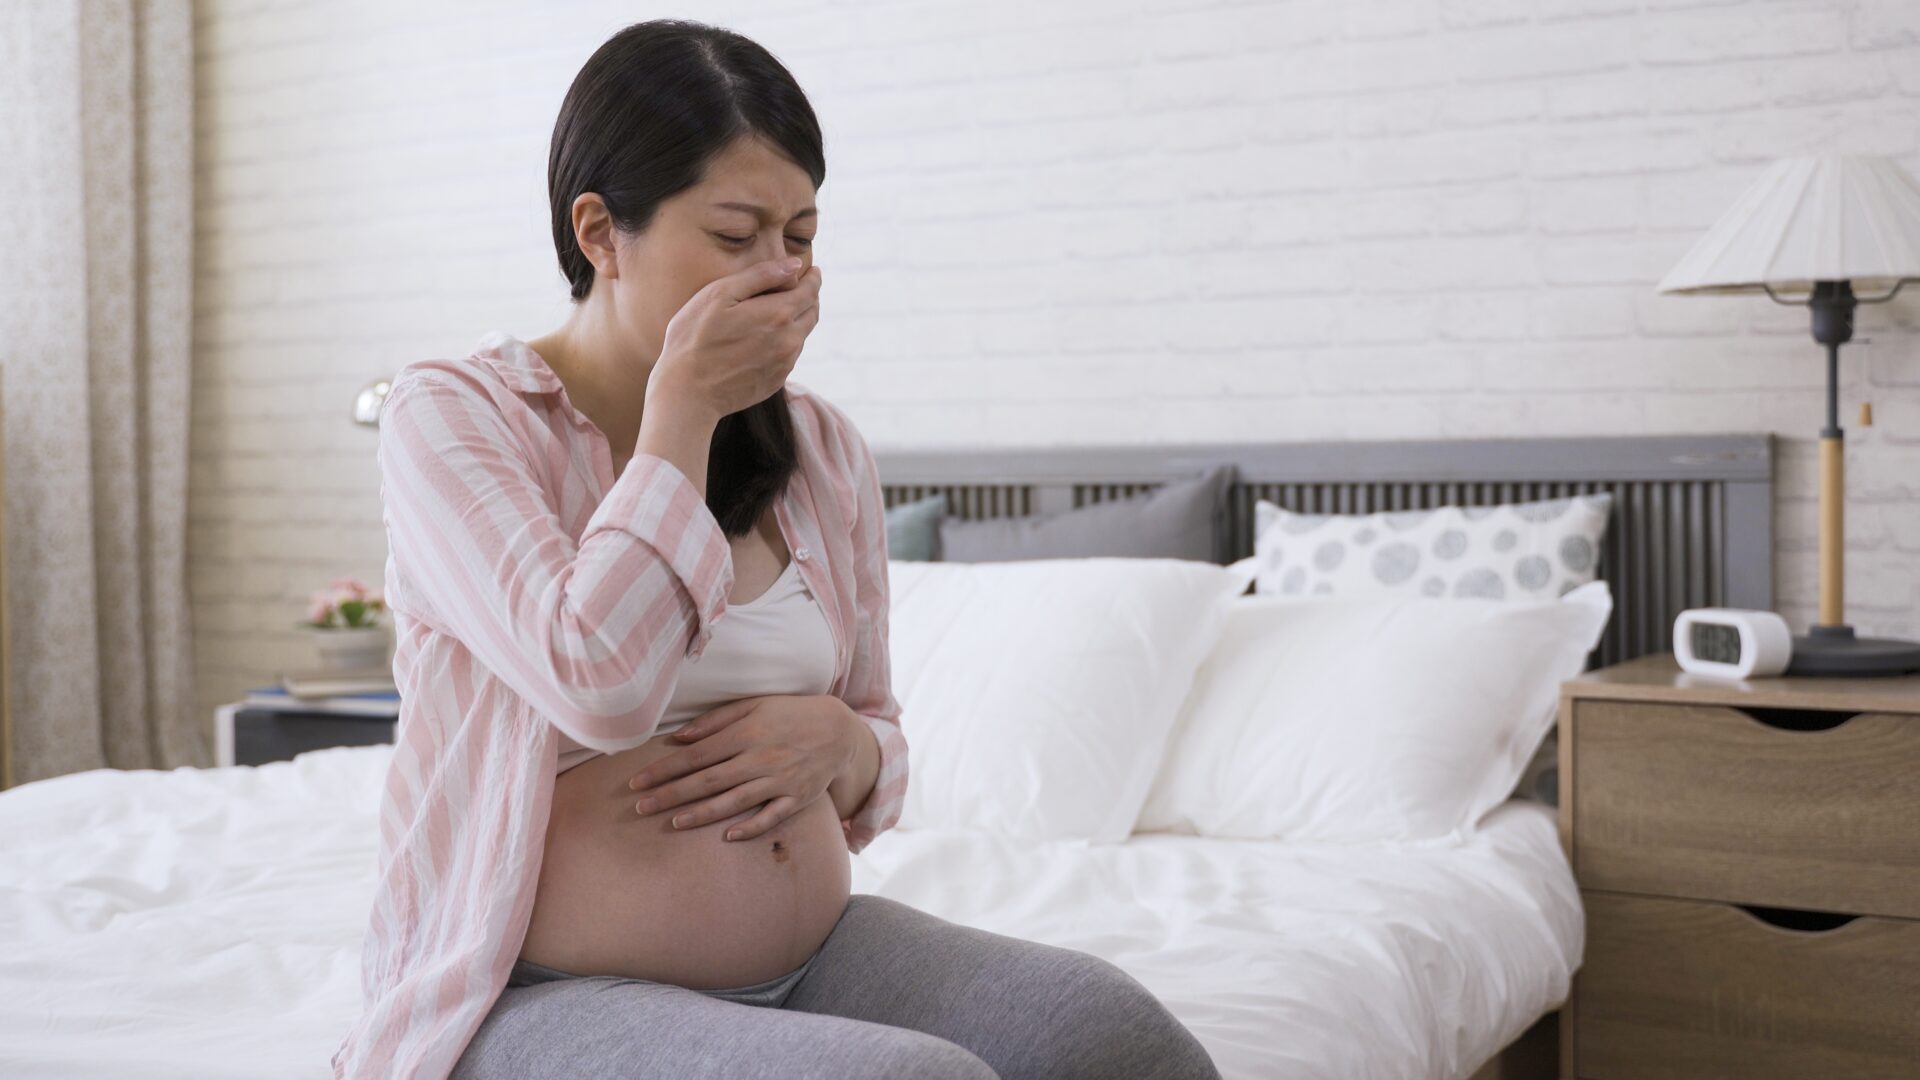 What Causes Nausea During Pregnancy?